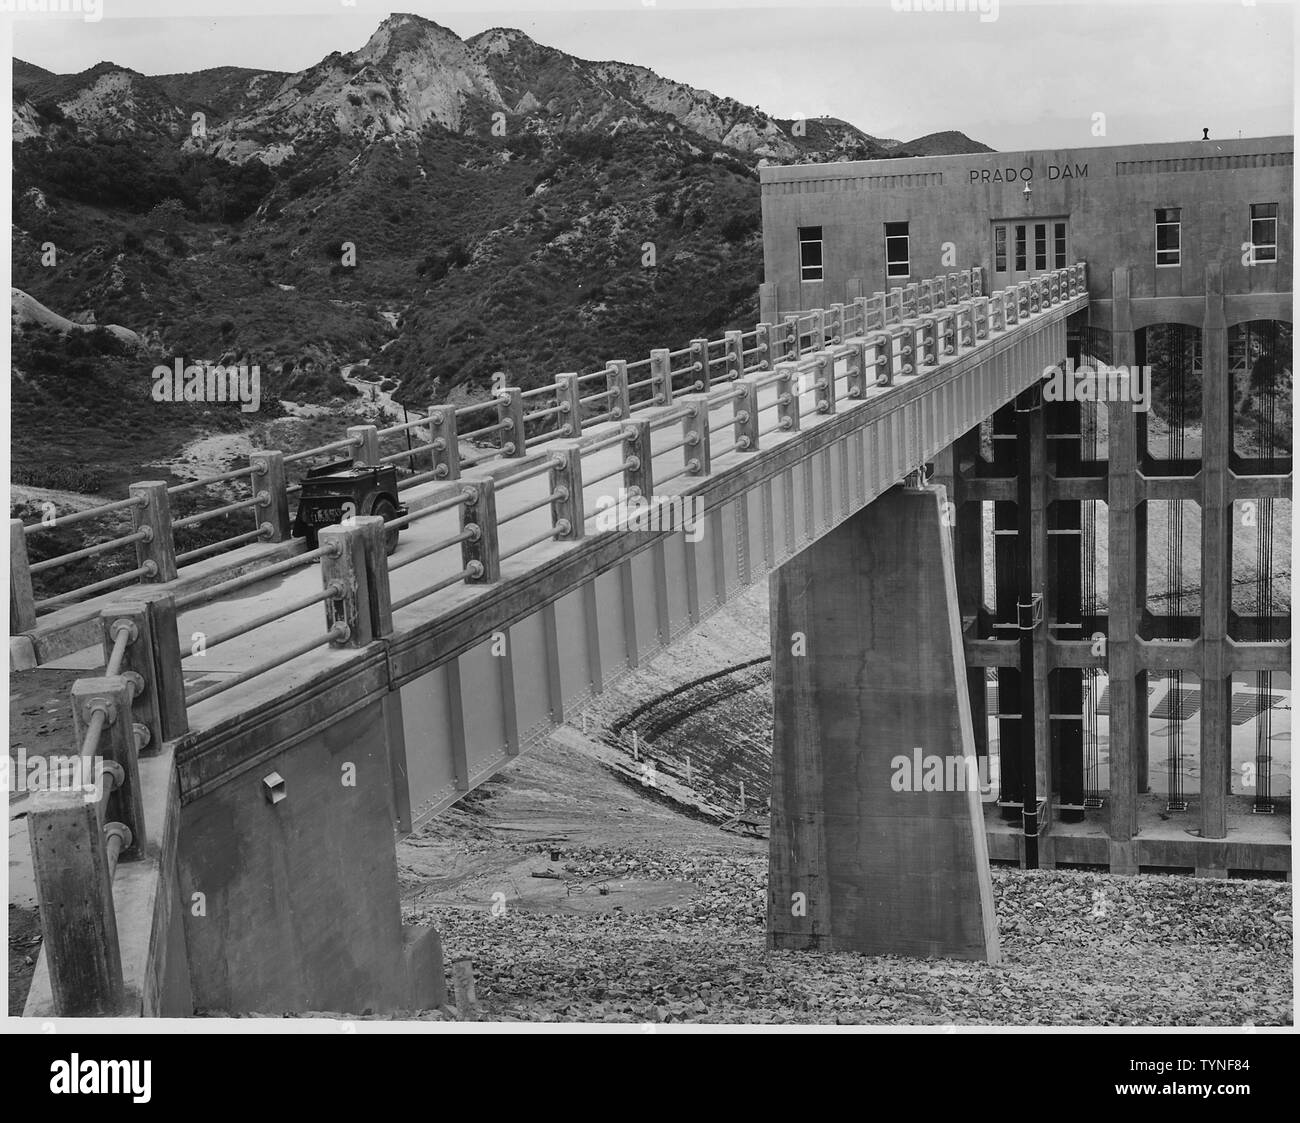 Upstream view from the top of the dam showing the service bridge and outlet control tower completed. Location: Prado dam across the Santa Ana River. Funds: Regular Funds and money contributed by Orange County. Work prosecuted under Contract No. 509-Eng.-749. Stock Photo